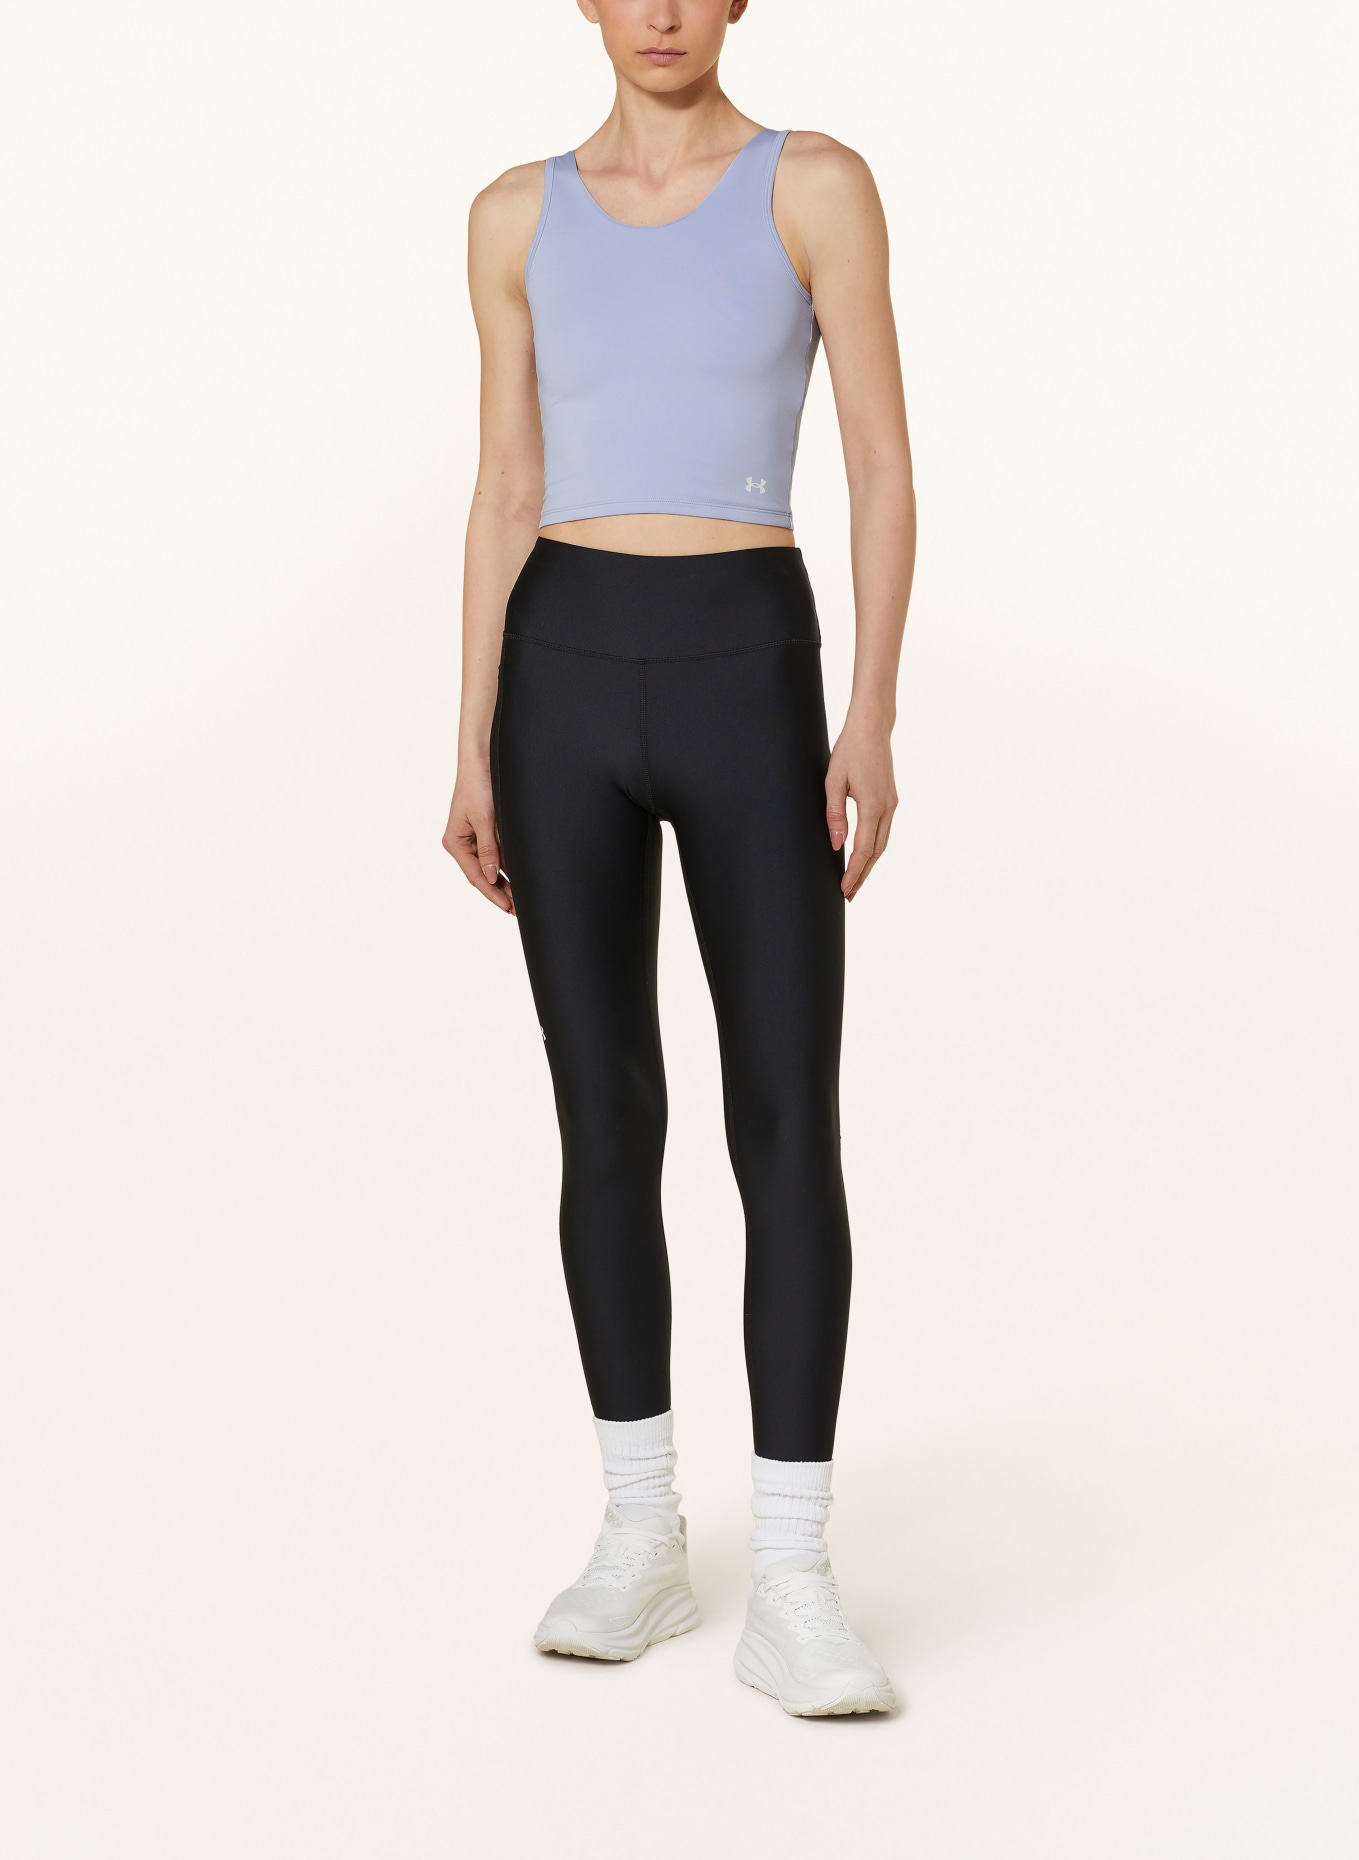 UNDER ARMOUR Cropped-Top UA MOTION, Farbe: HELLLILA (Bild 2)